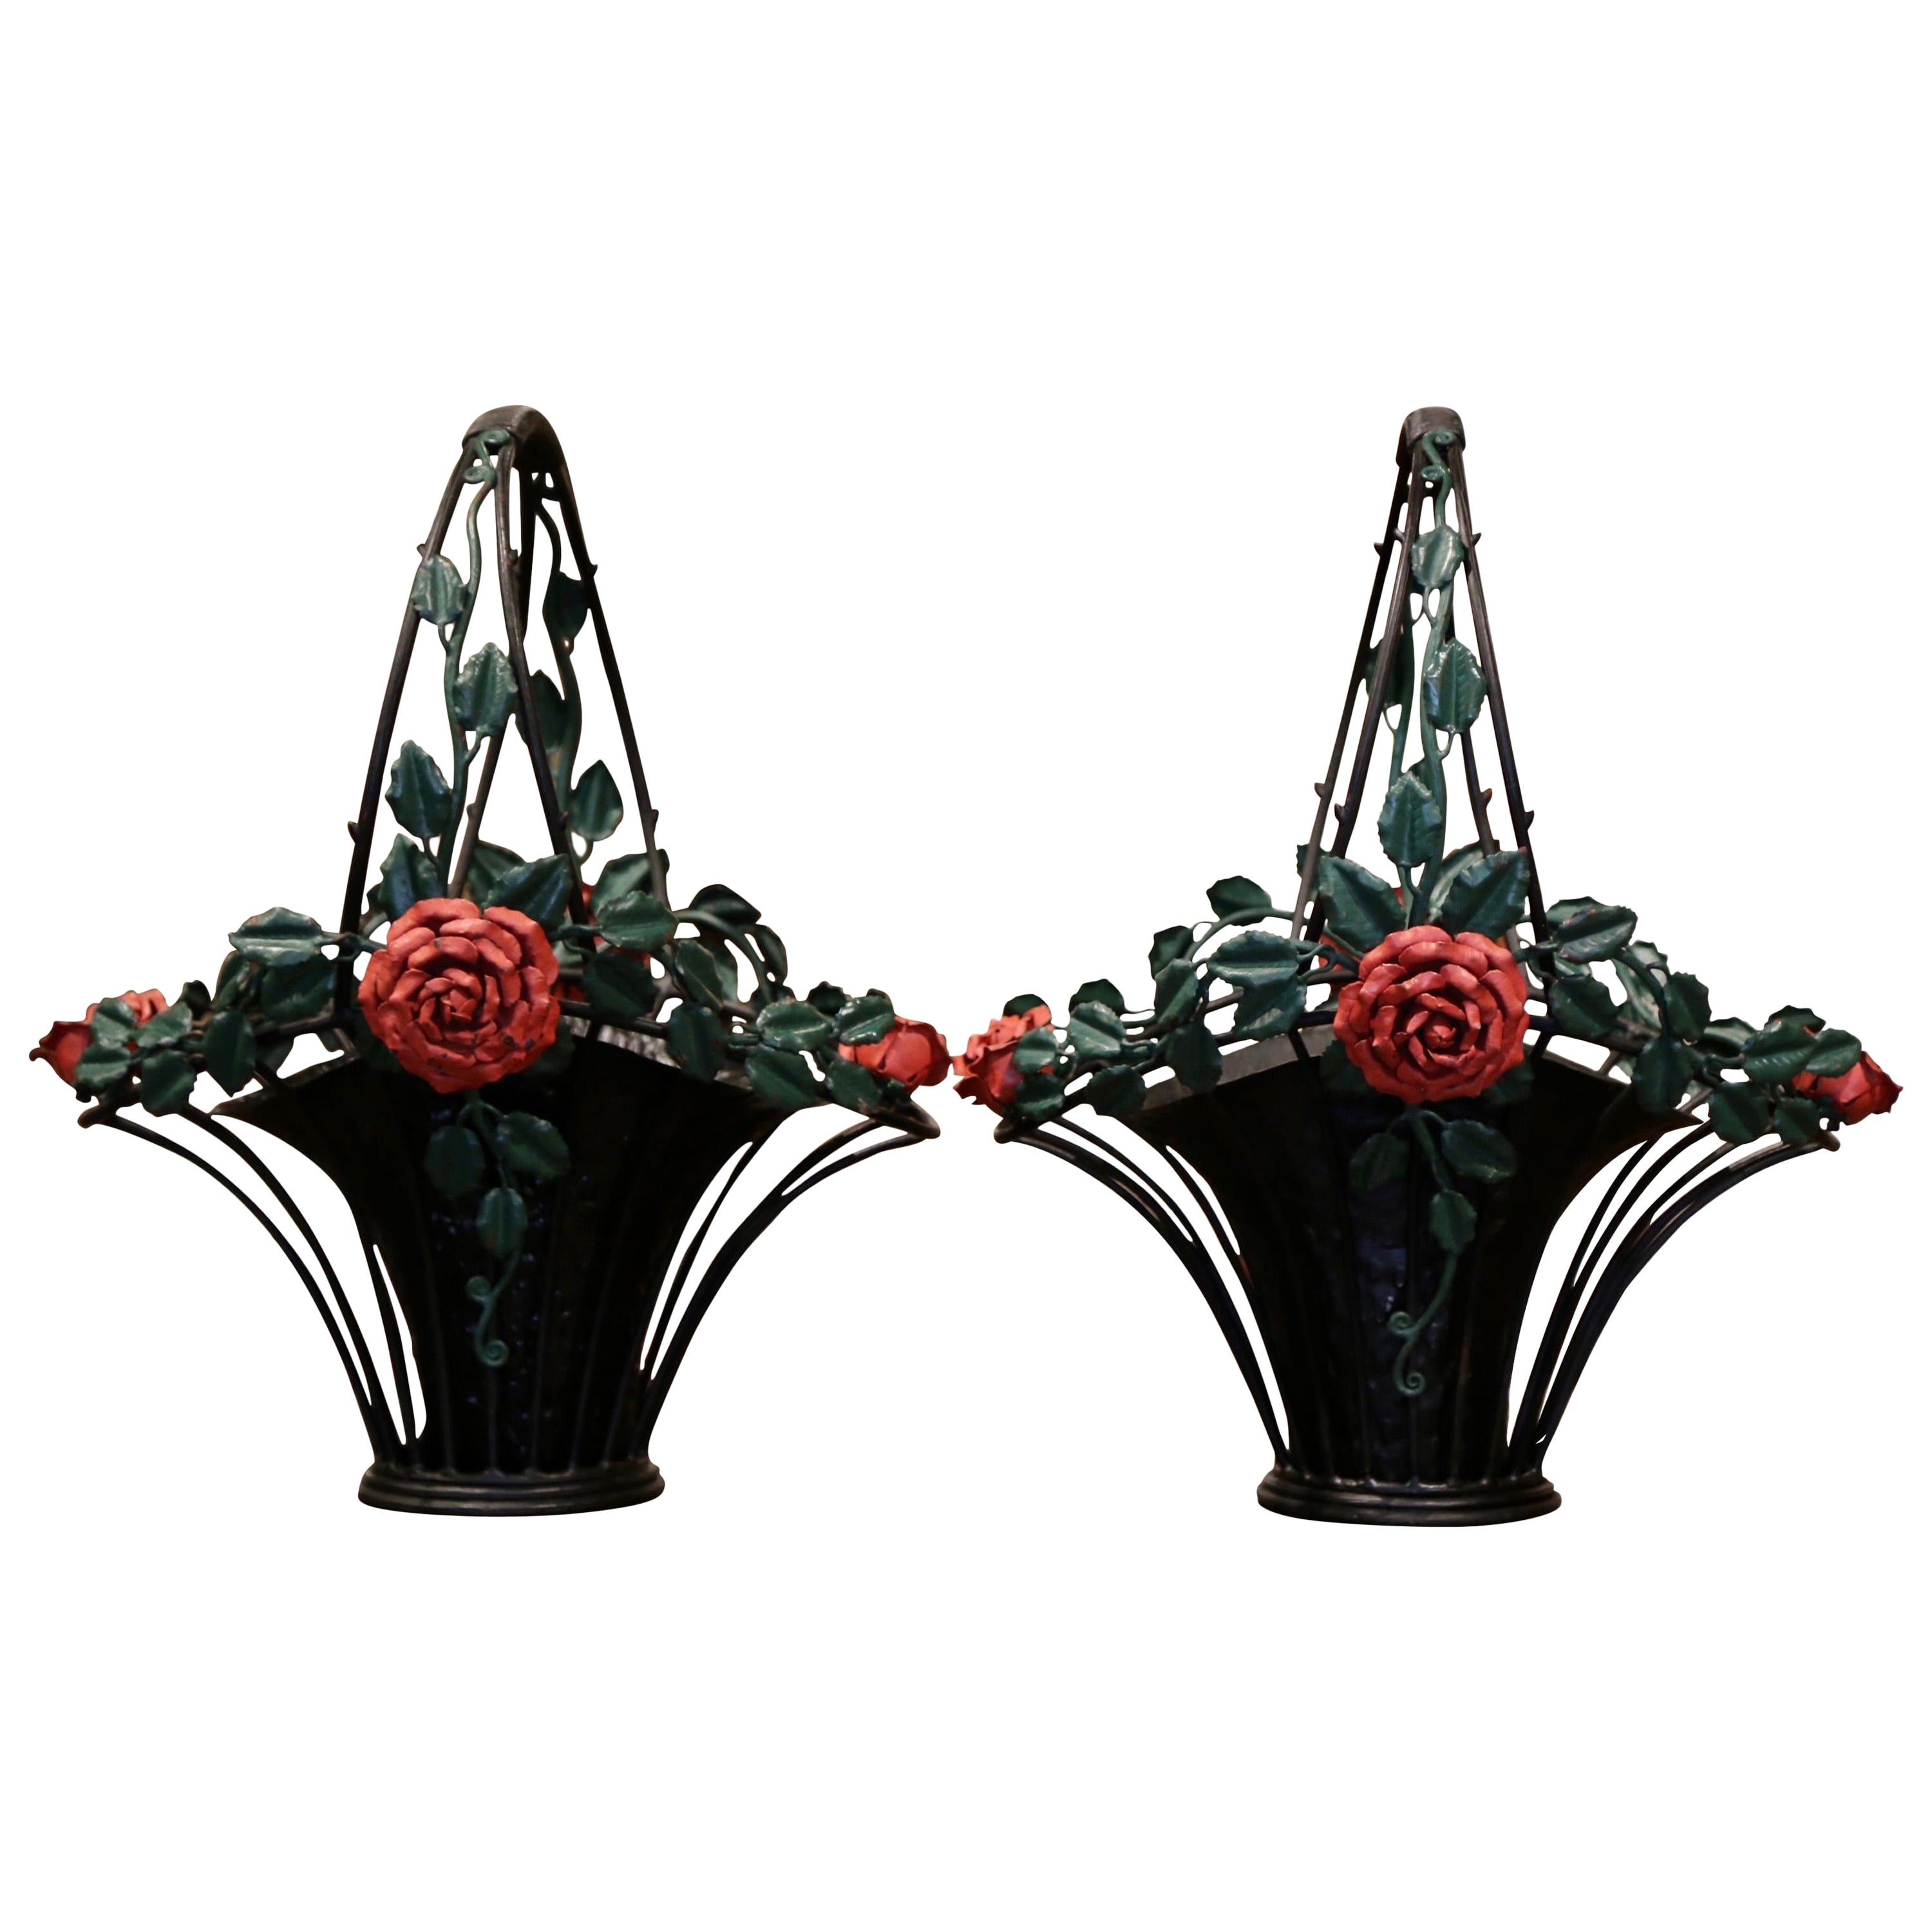 Pair of Vintage French Painted Metal Hanging Baskets with Floral and Leaf Decor For Sale